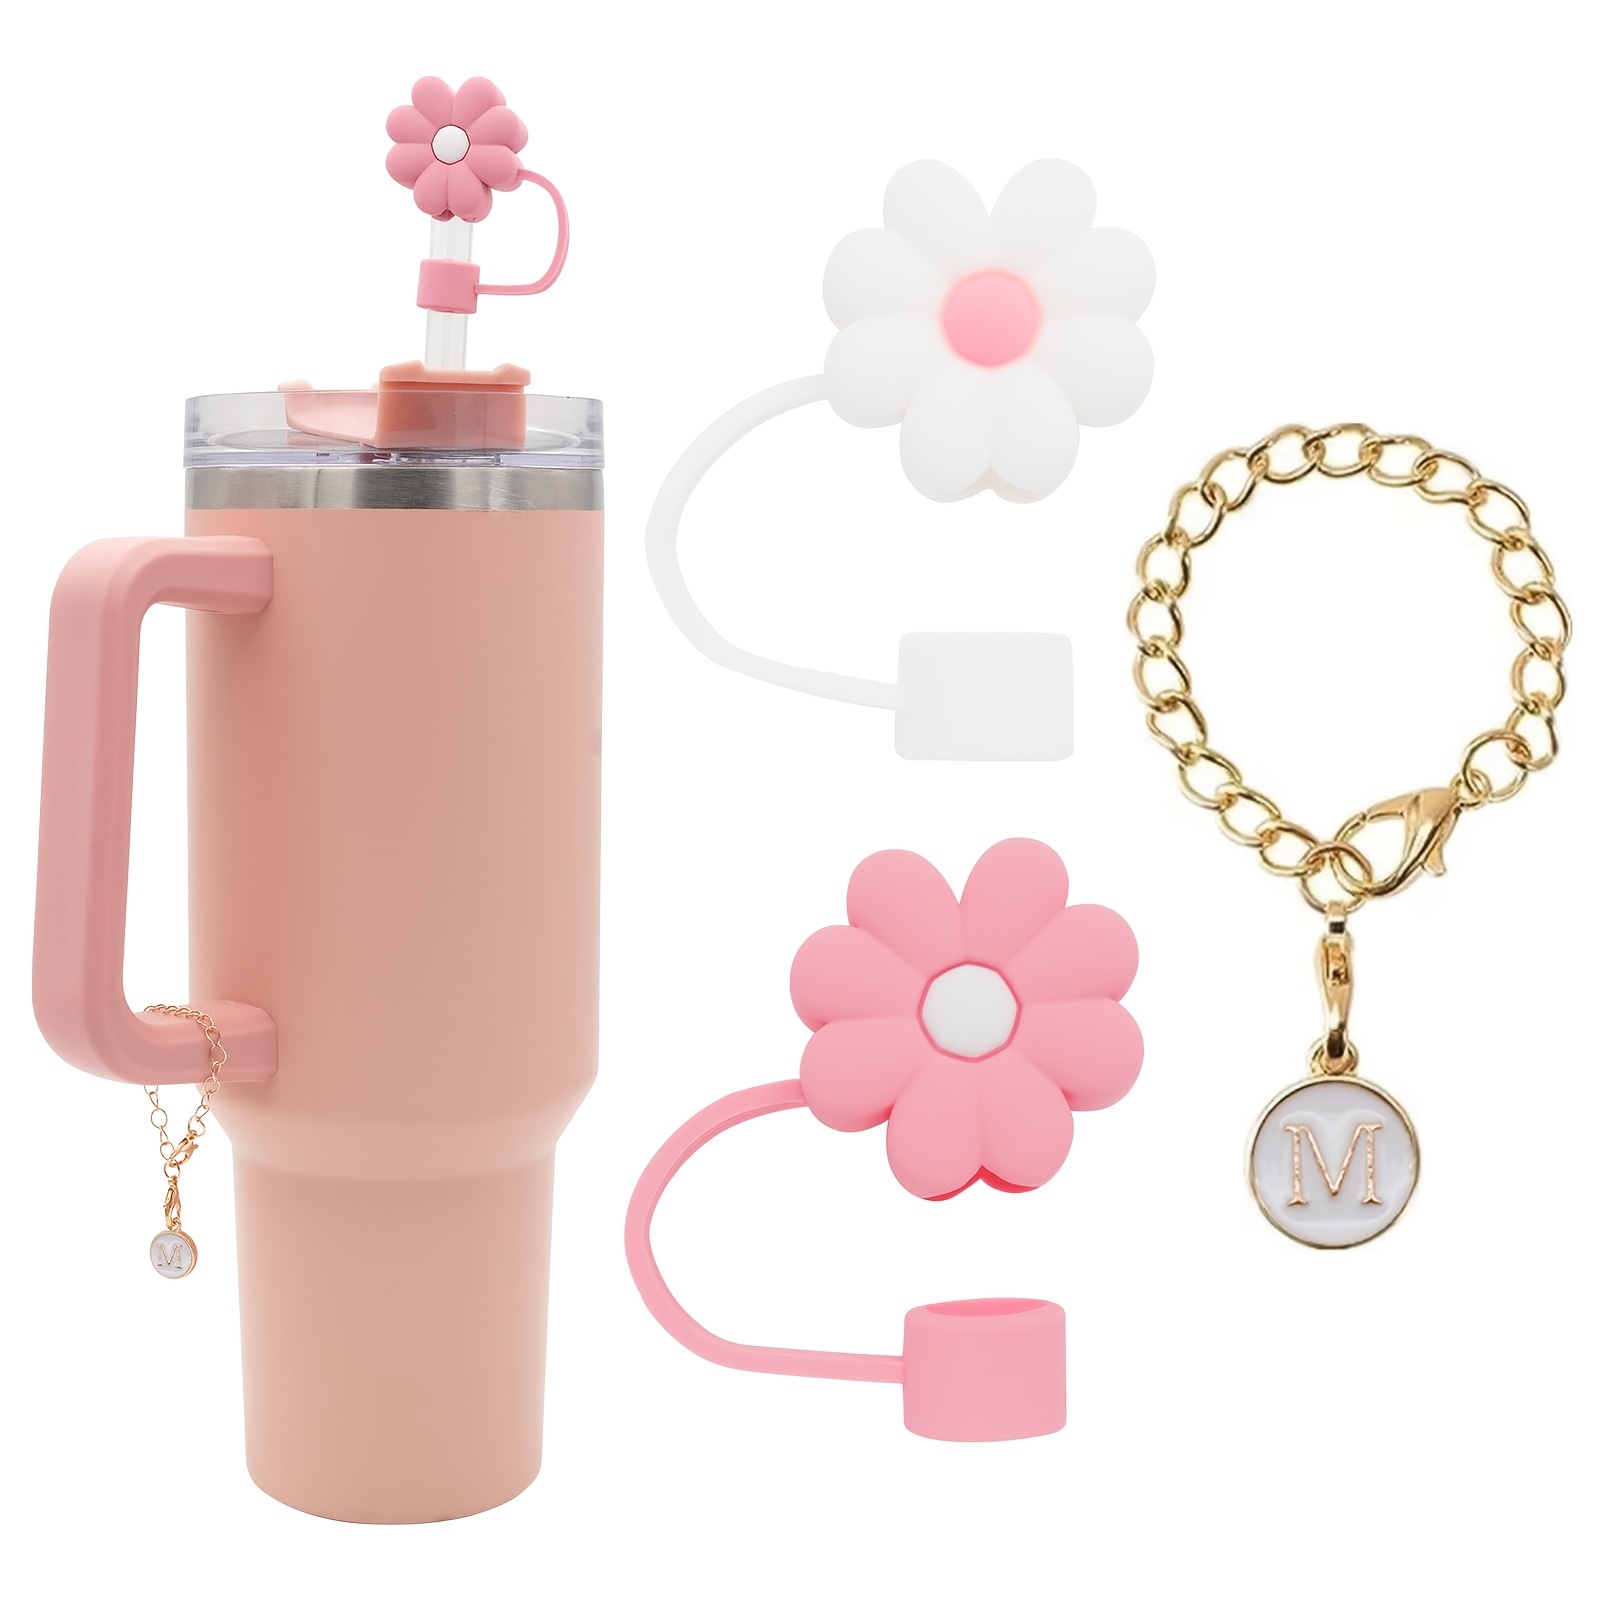 2pcs Straw Tip Cover And 1pc Initial Letter Charm Set For Stanley Cup,  Flower Silicone Straw Protector For 10mm Straw, Tumblers Accessories (2pcs  Flowers+m Charm, No Cup)